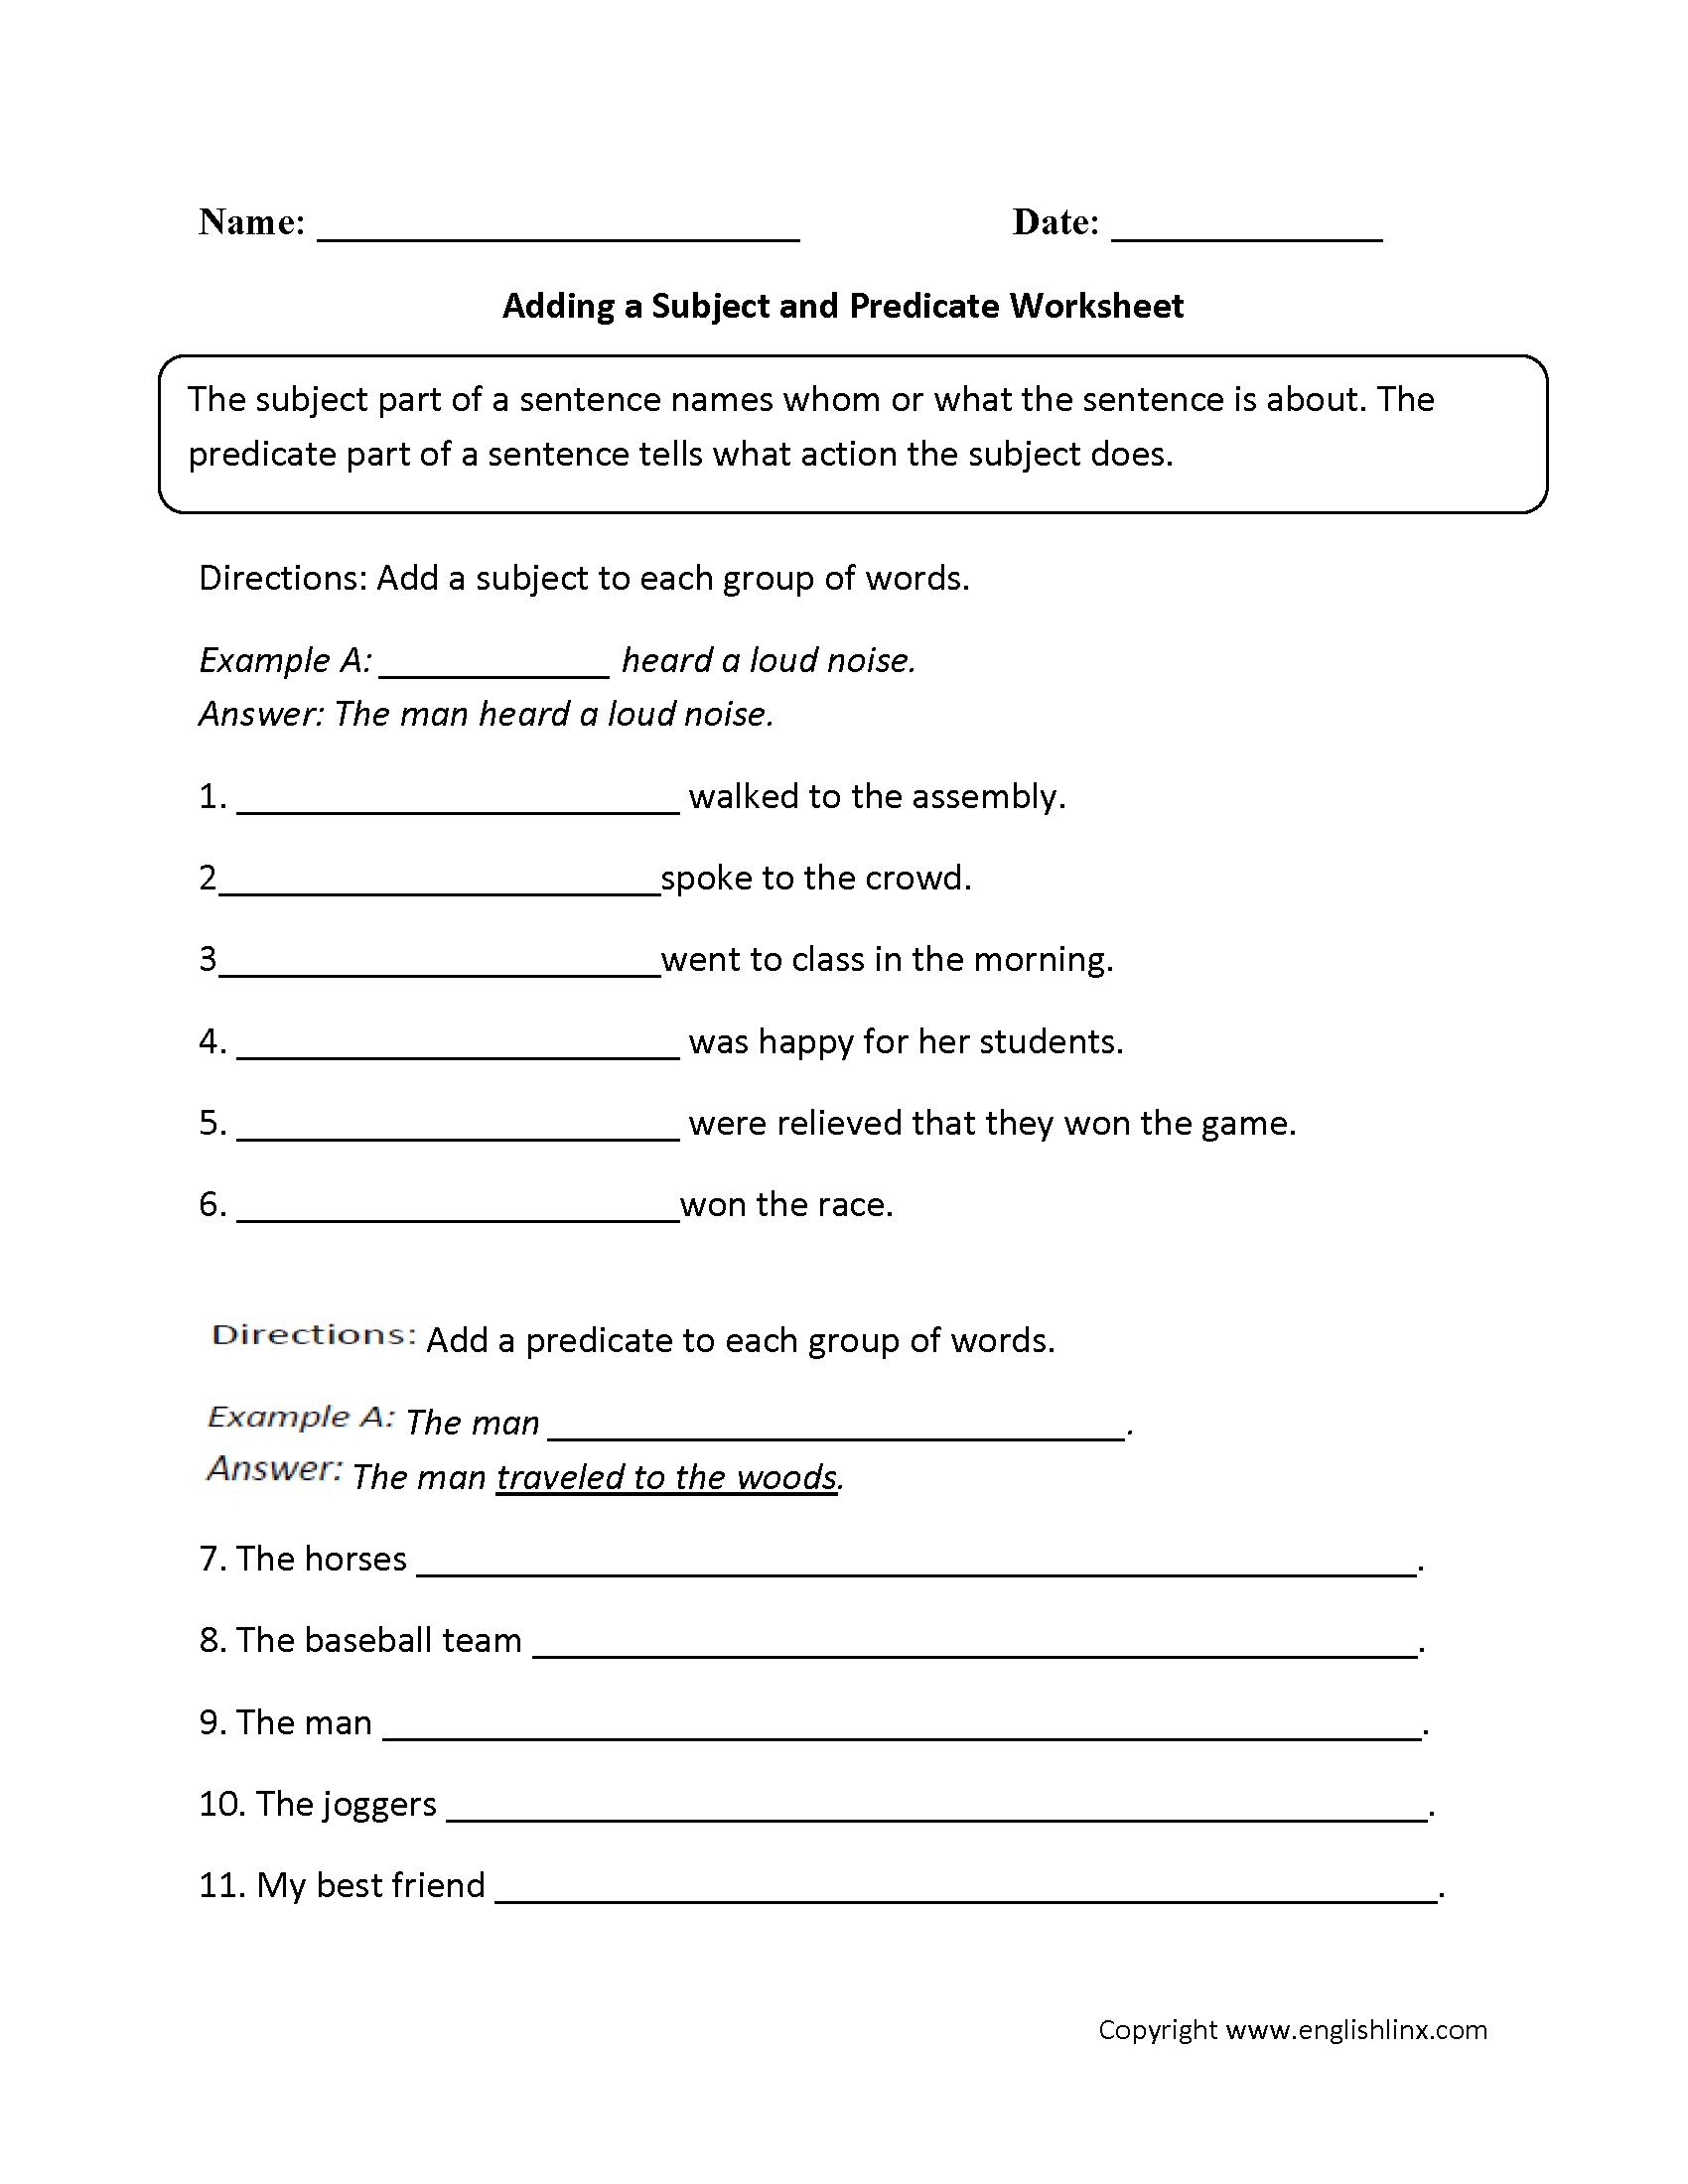 Adding a Subject and Predicate Worksheet